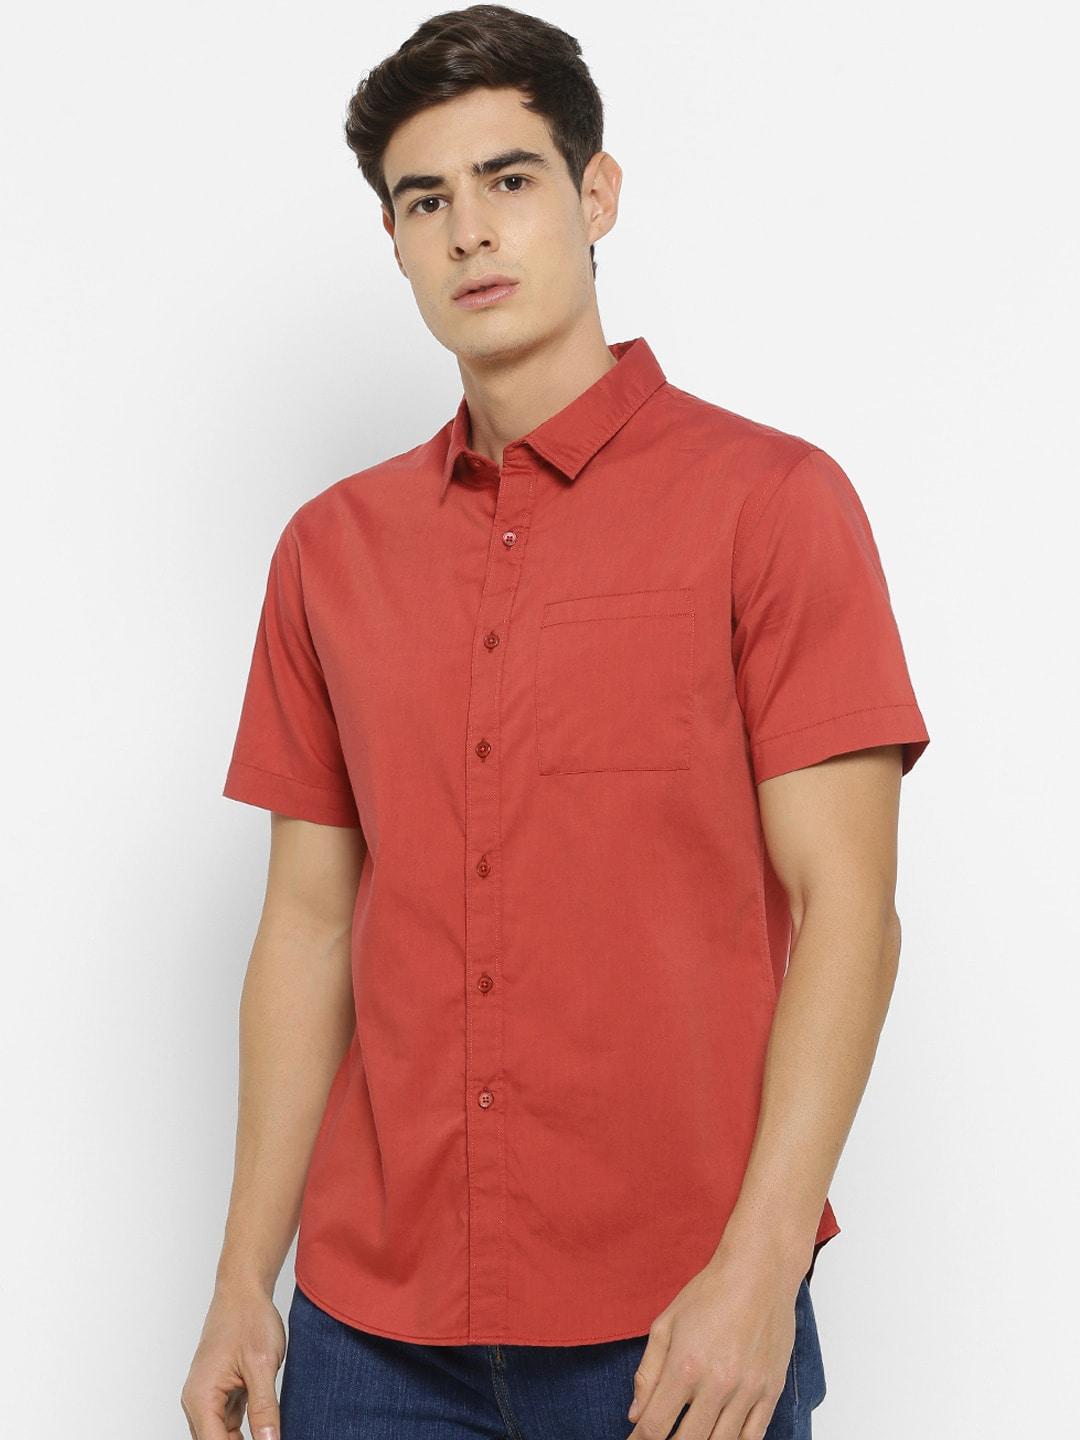 FOREVER 21 Men Red Slim Fit Solid Casual Shirt